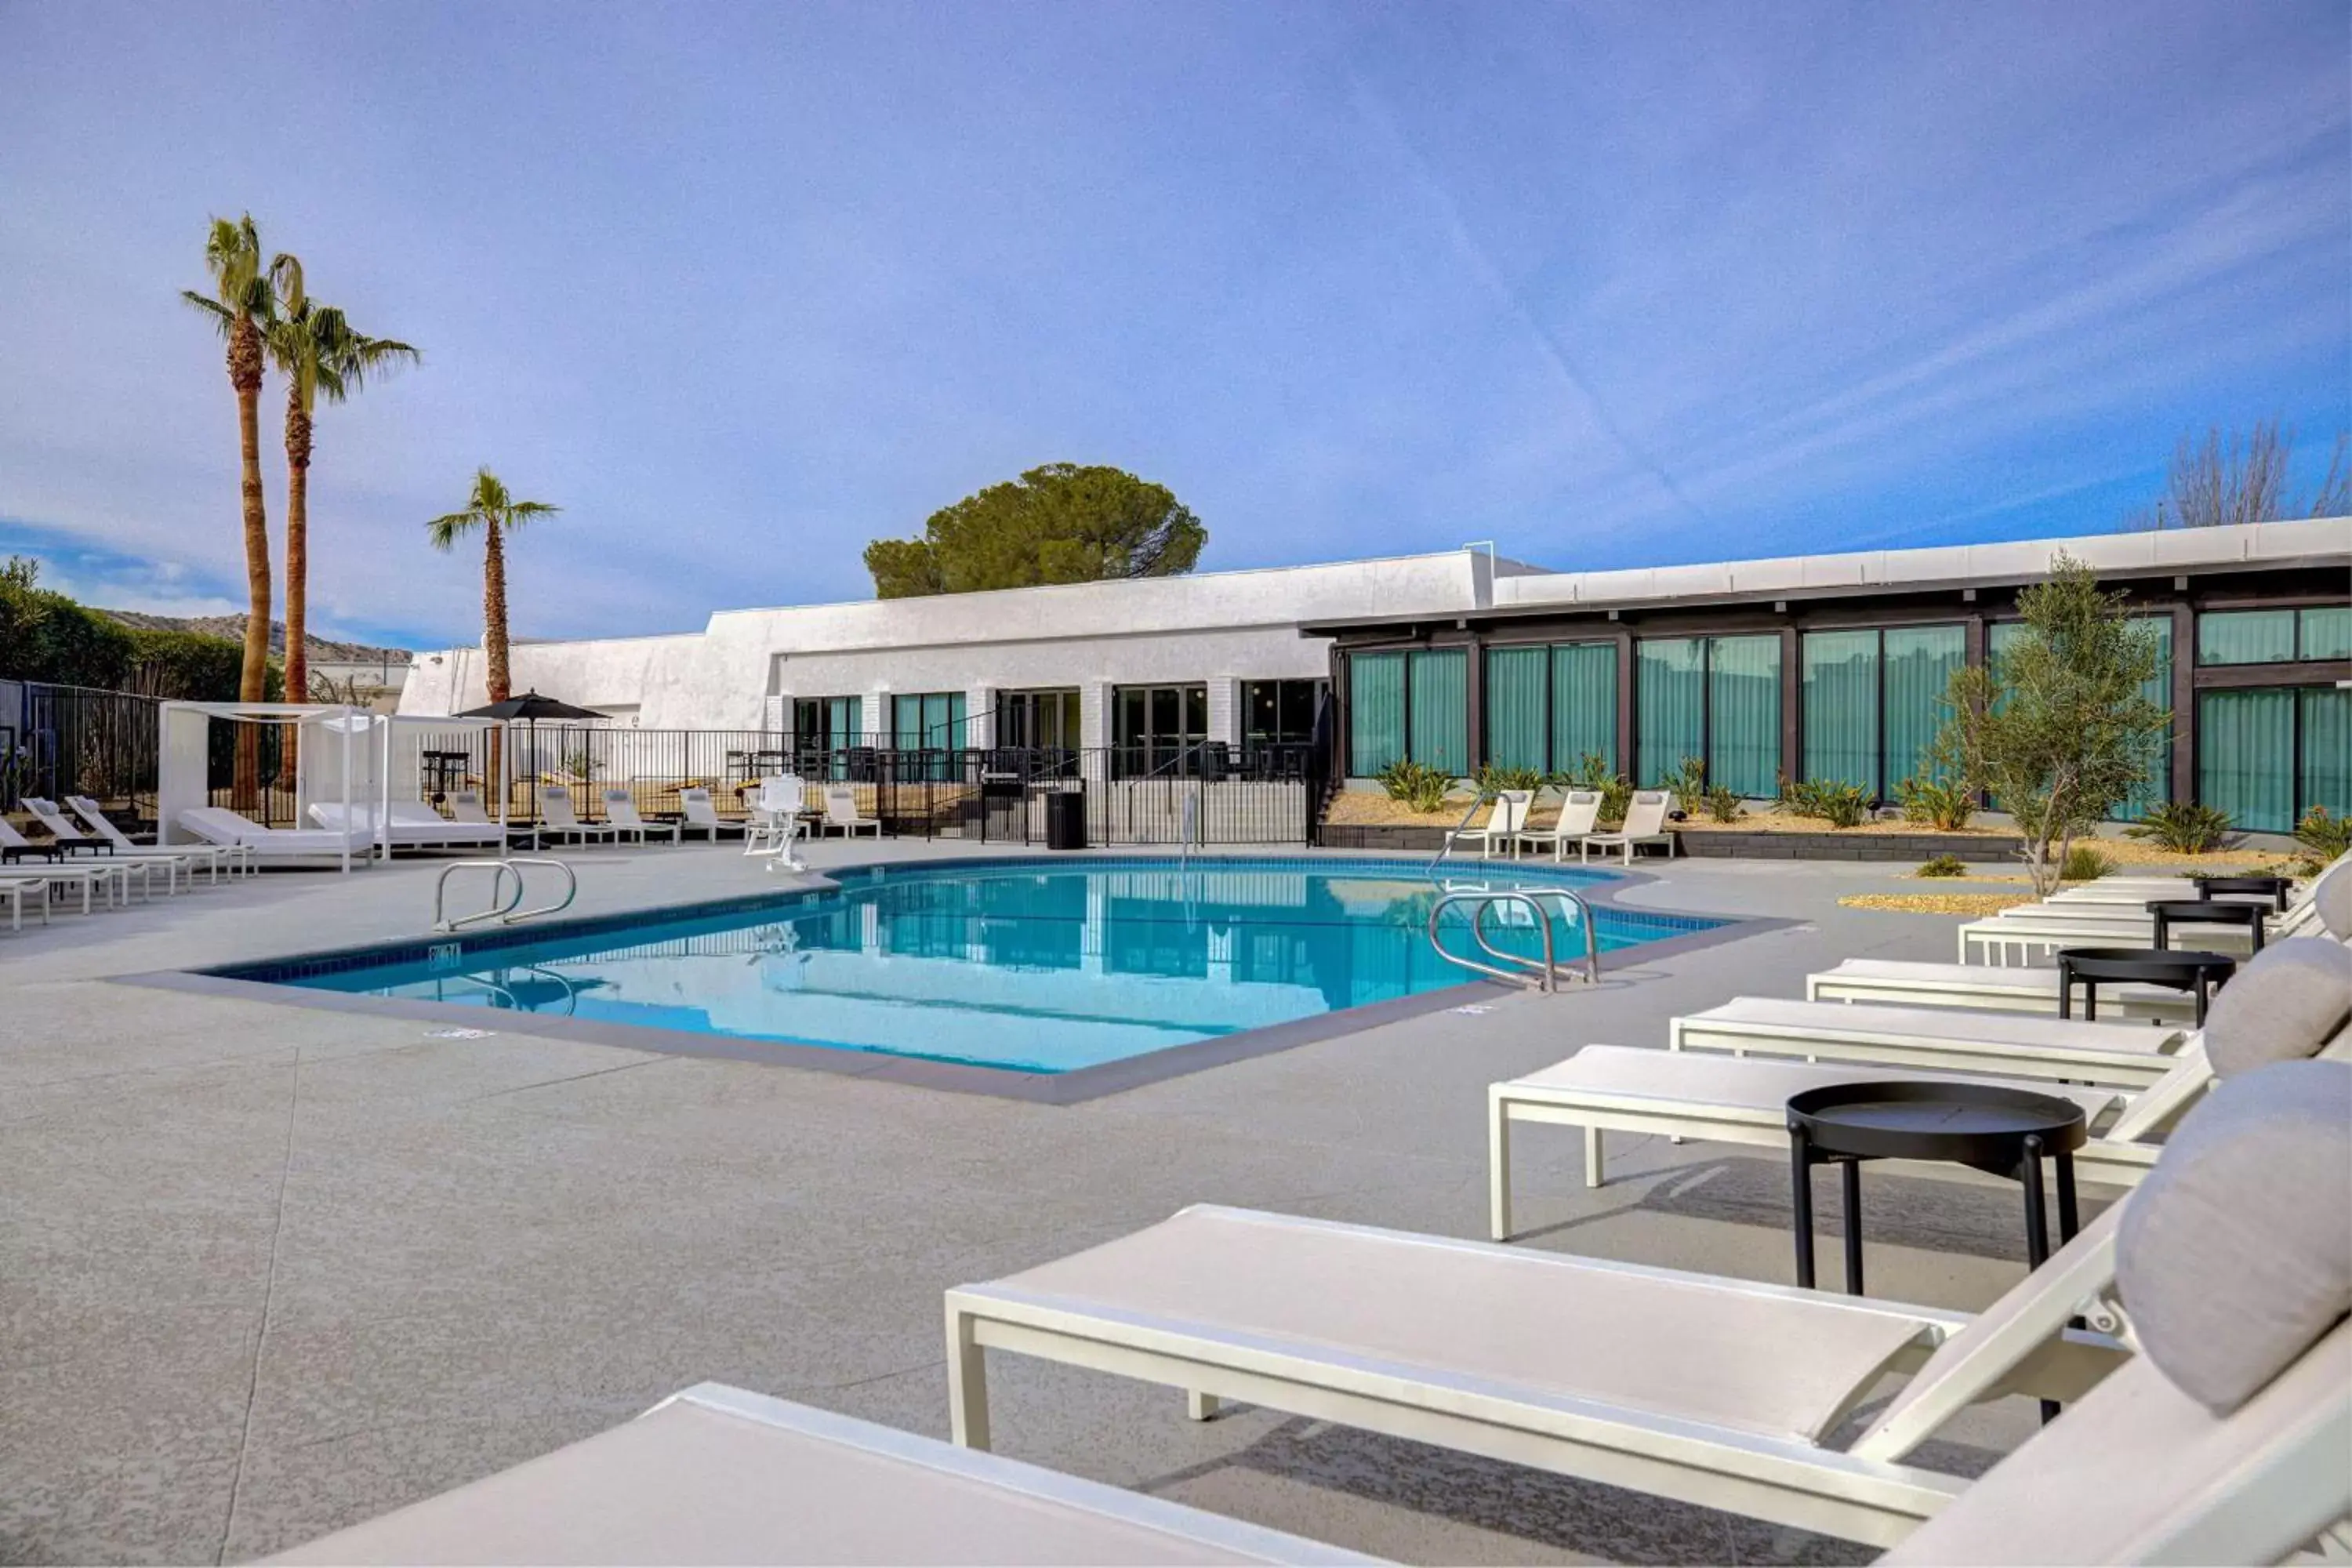 Property building, Swimming Pool in Doubletree By Hilton Palmdale, Ca